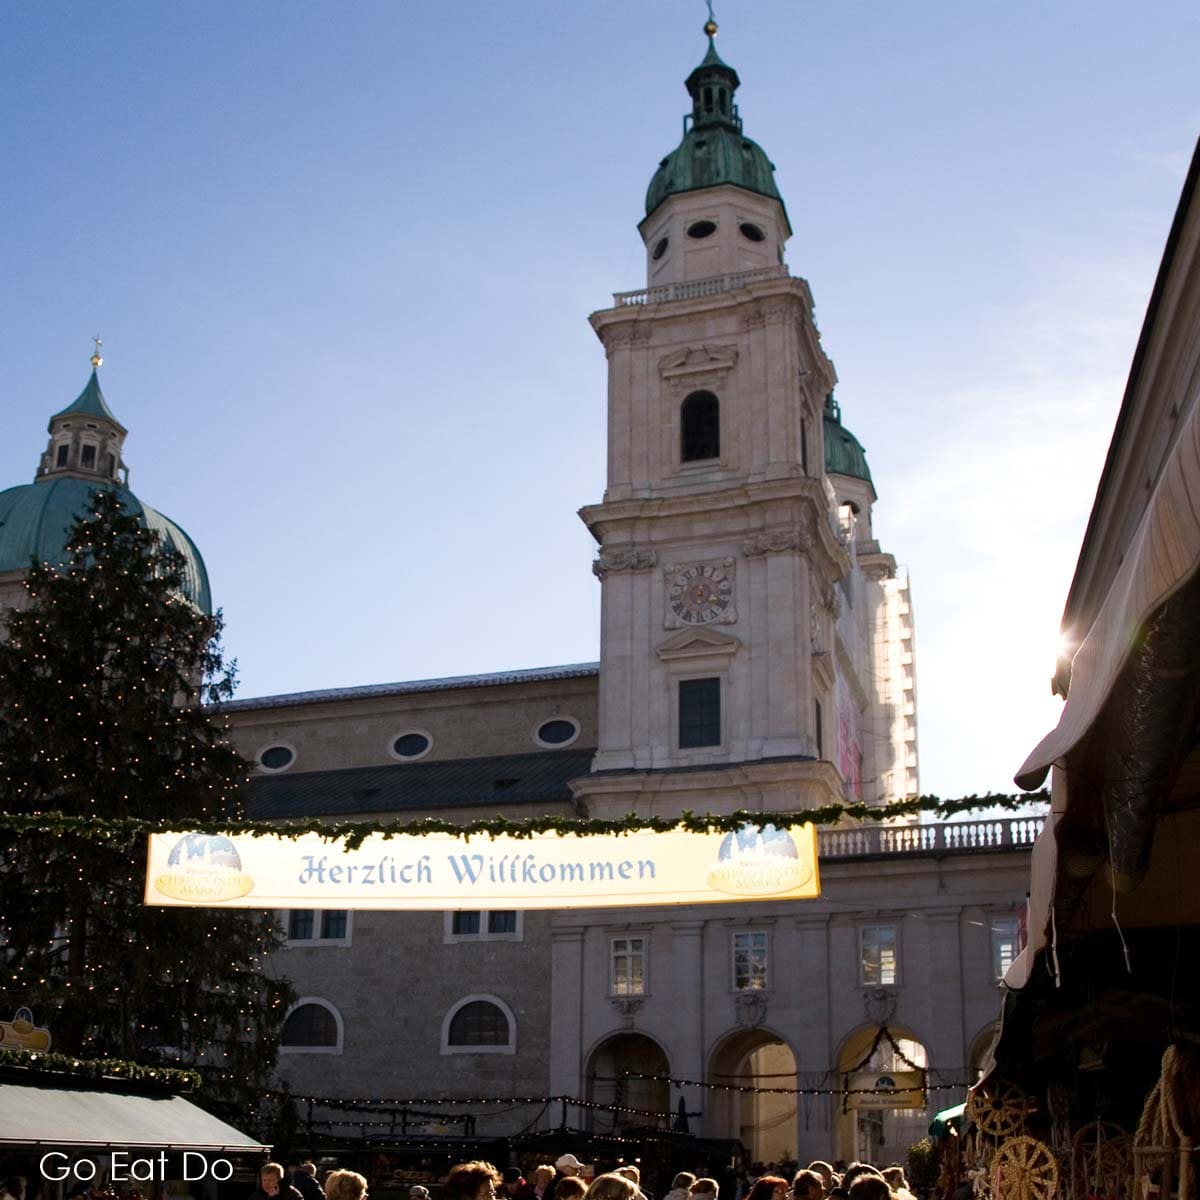 A sign welcomes people to the Christmas market in the Salzburg Altstadt.